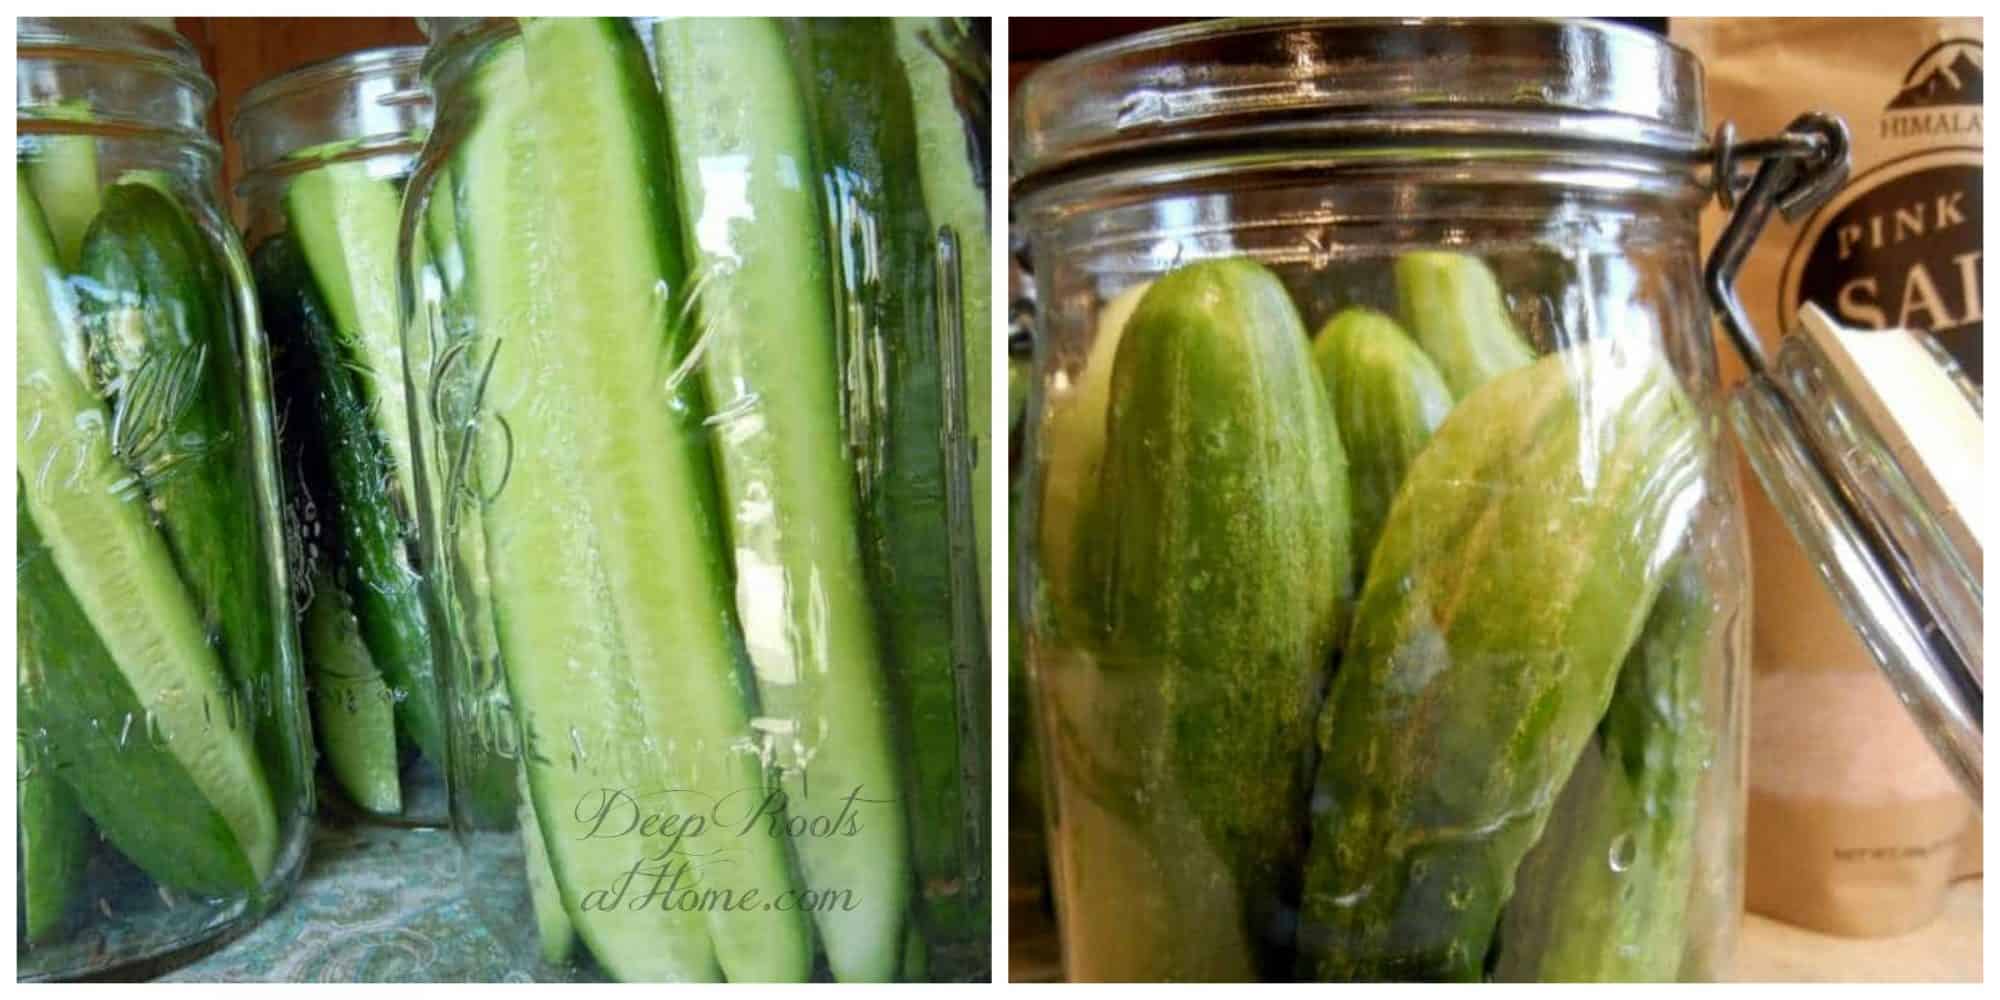 Lacto-Fermented Pickles Like I Had As A Girl, No Canning. slicing and stuffing pickles into jars.